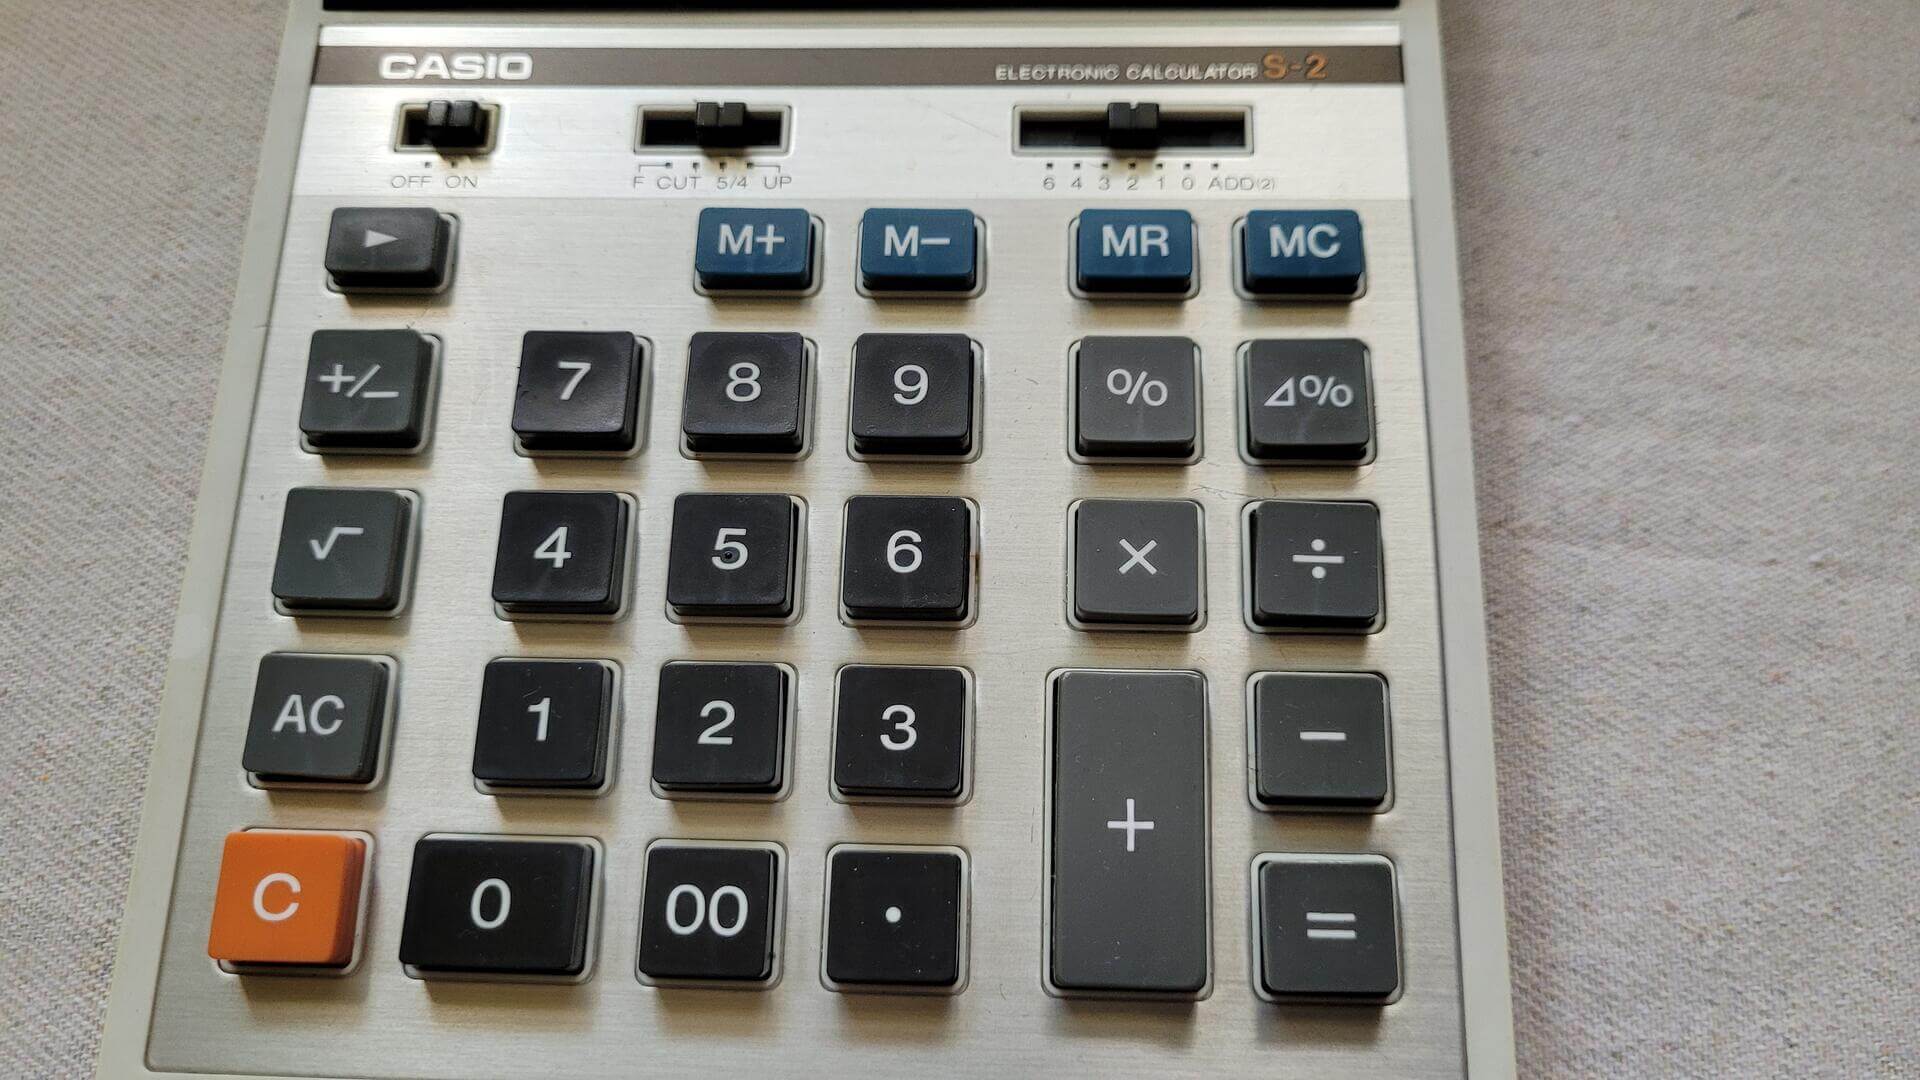 Rare 1970s Casio S-2 VFD calculator 12 digits, 6V with retro flouoresent tube display - Vintage made in Japan collectible electronic calculator and office gadgets